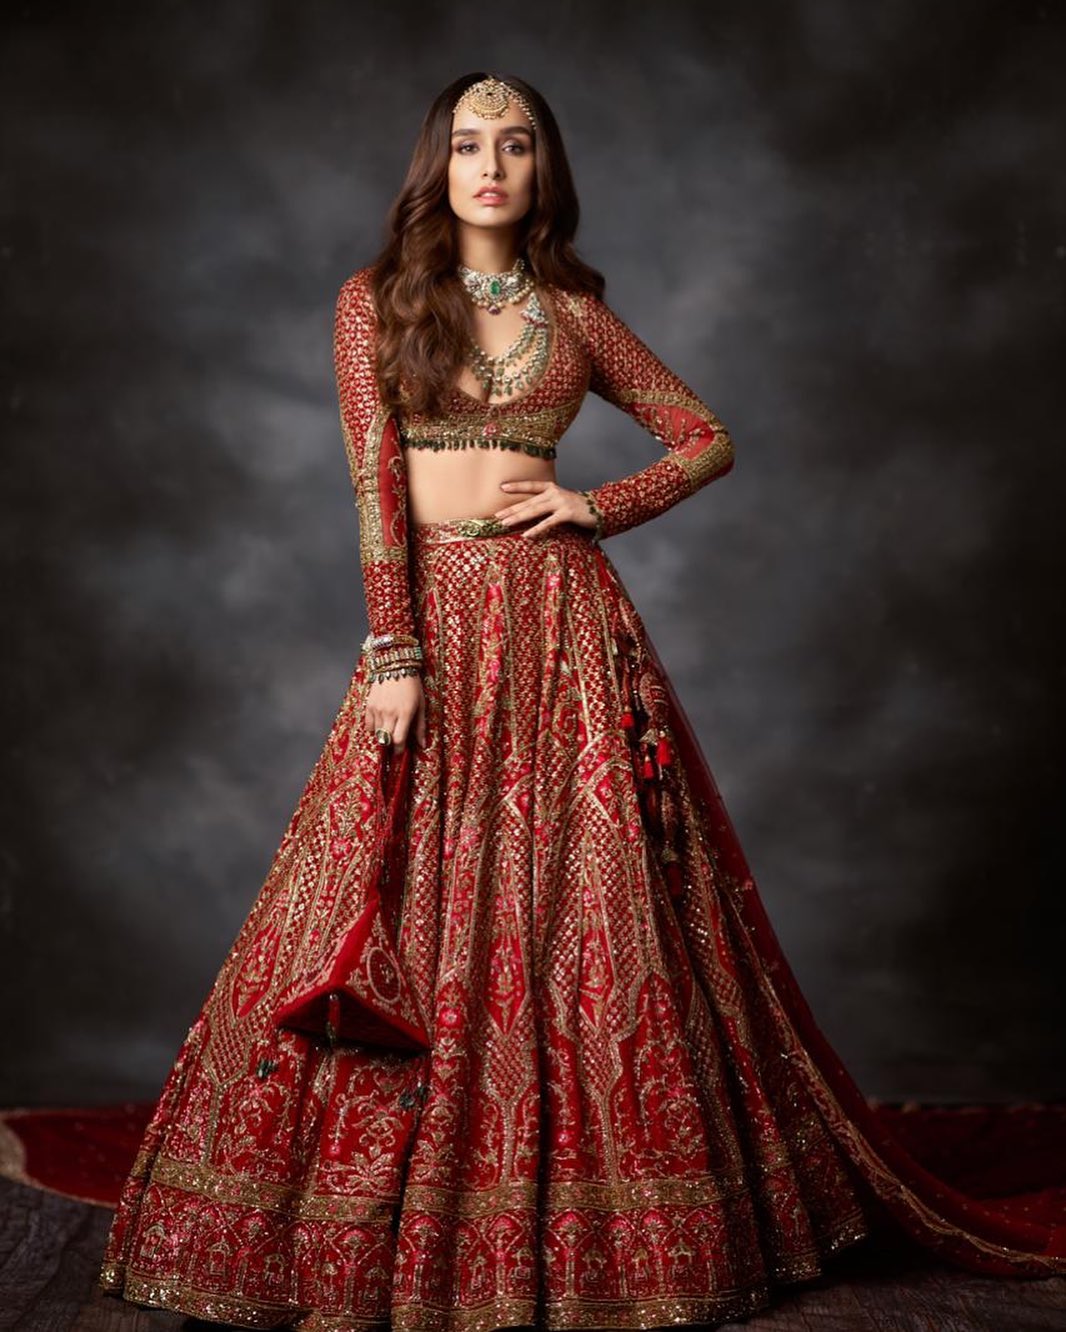 Shraddha Kapoor looks gorgeous in the red and golden lehenga. 